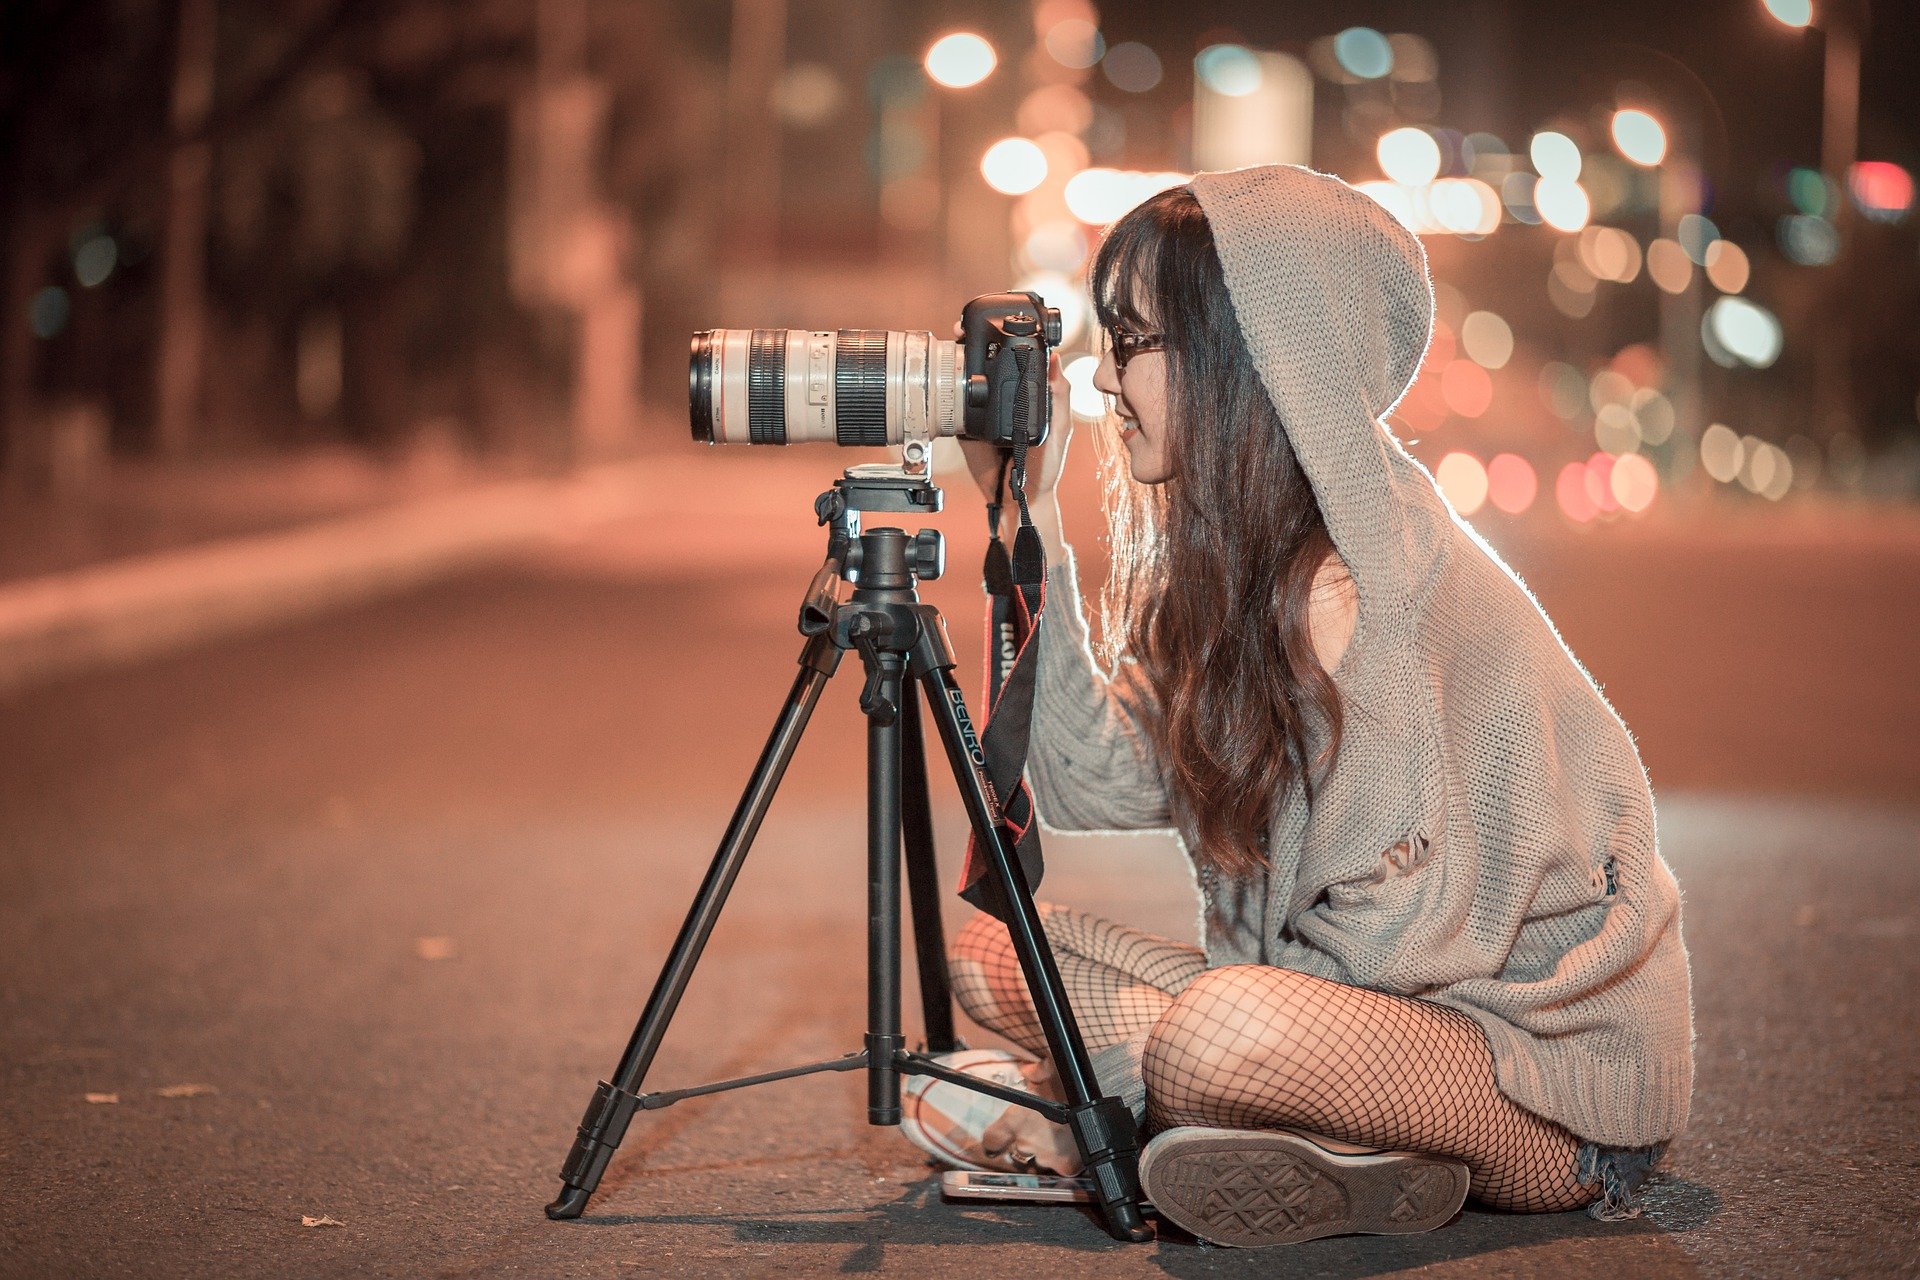 best cameras for professional photography